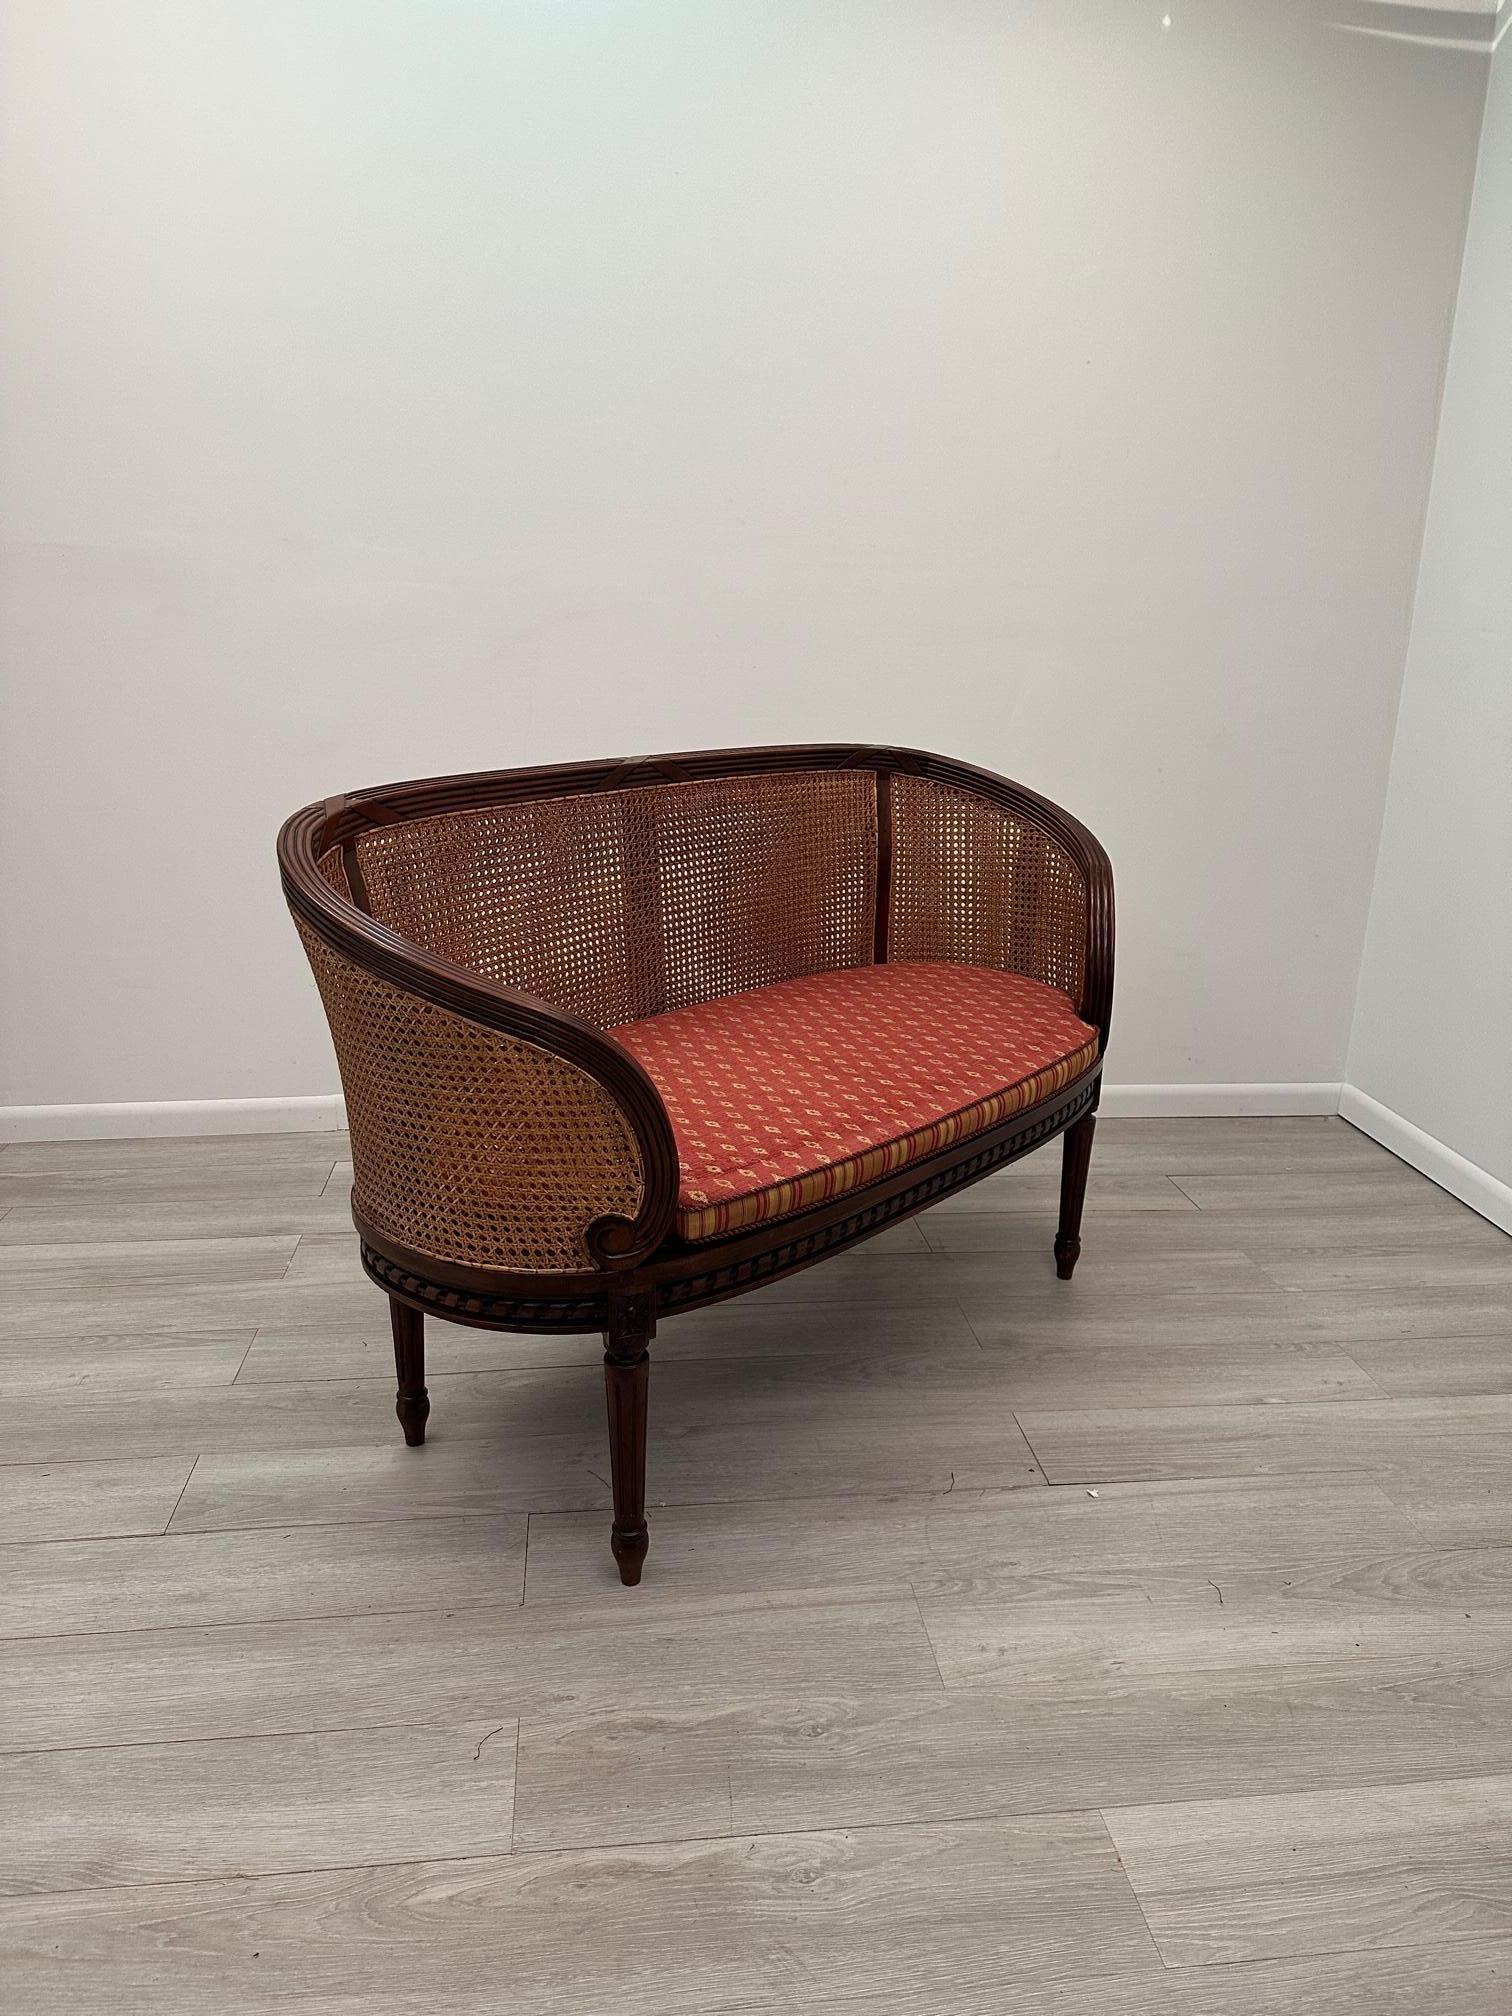 Elegant shapely hand carved mahogany loveseat having handsome caning, lovely curved back, and custom upholstered seat cushion.